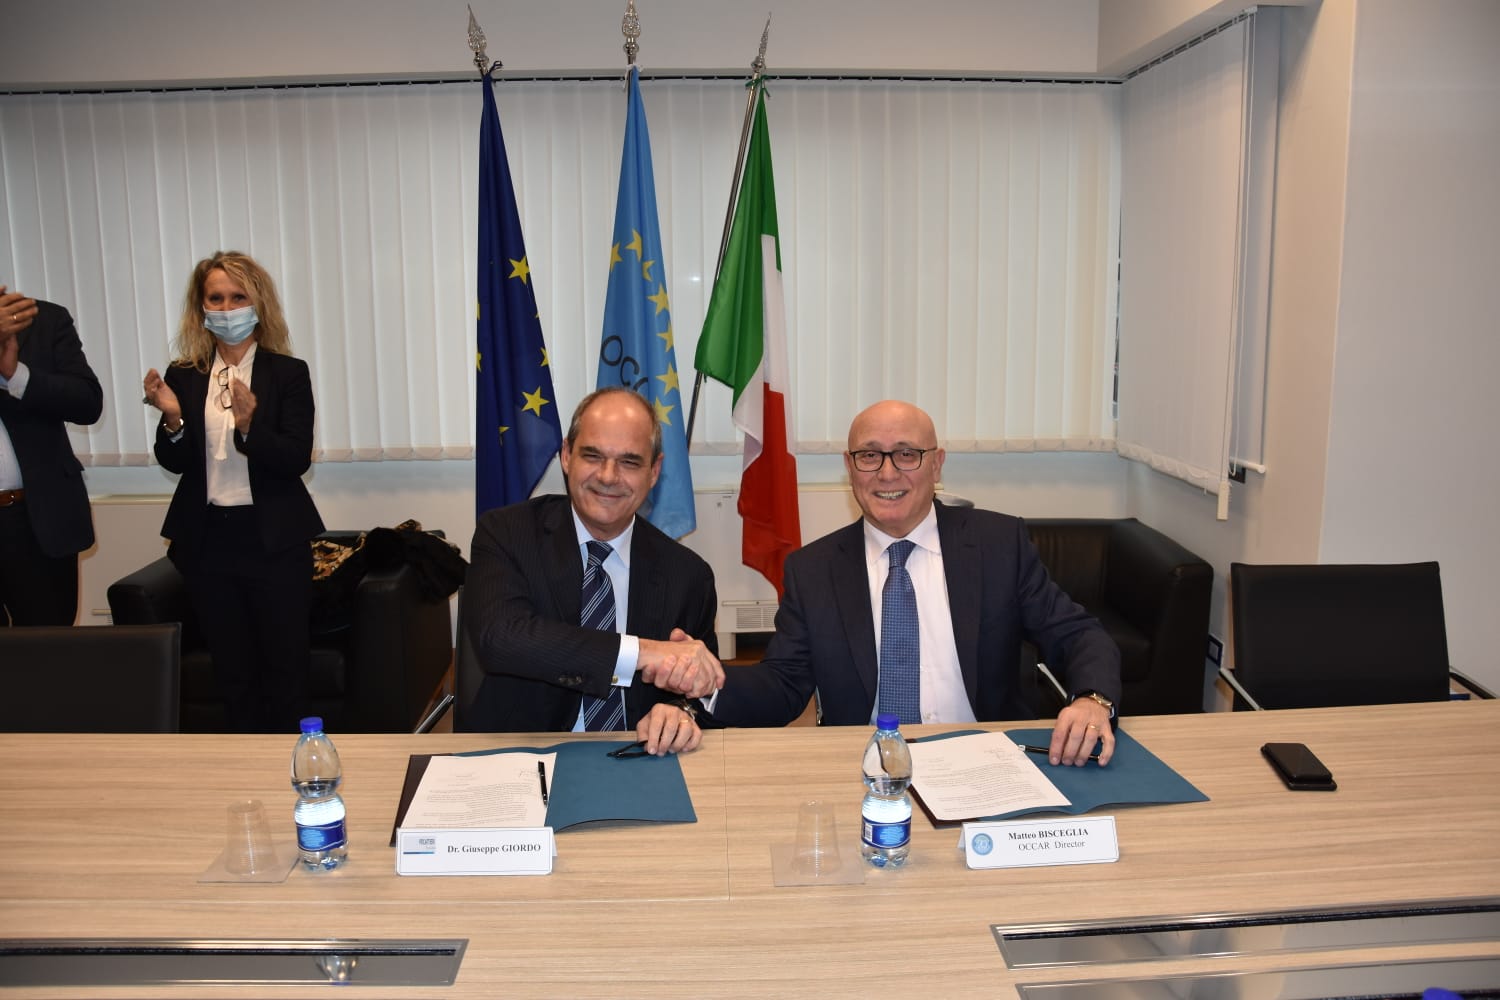 Fincantieri signs contract to construct Italian Navy’s second LSS unit